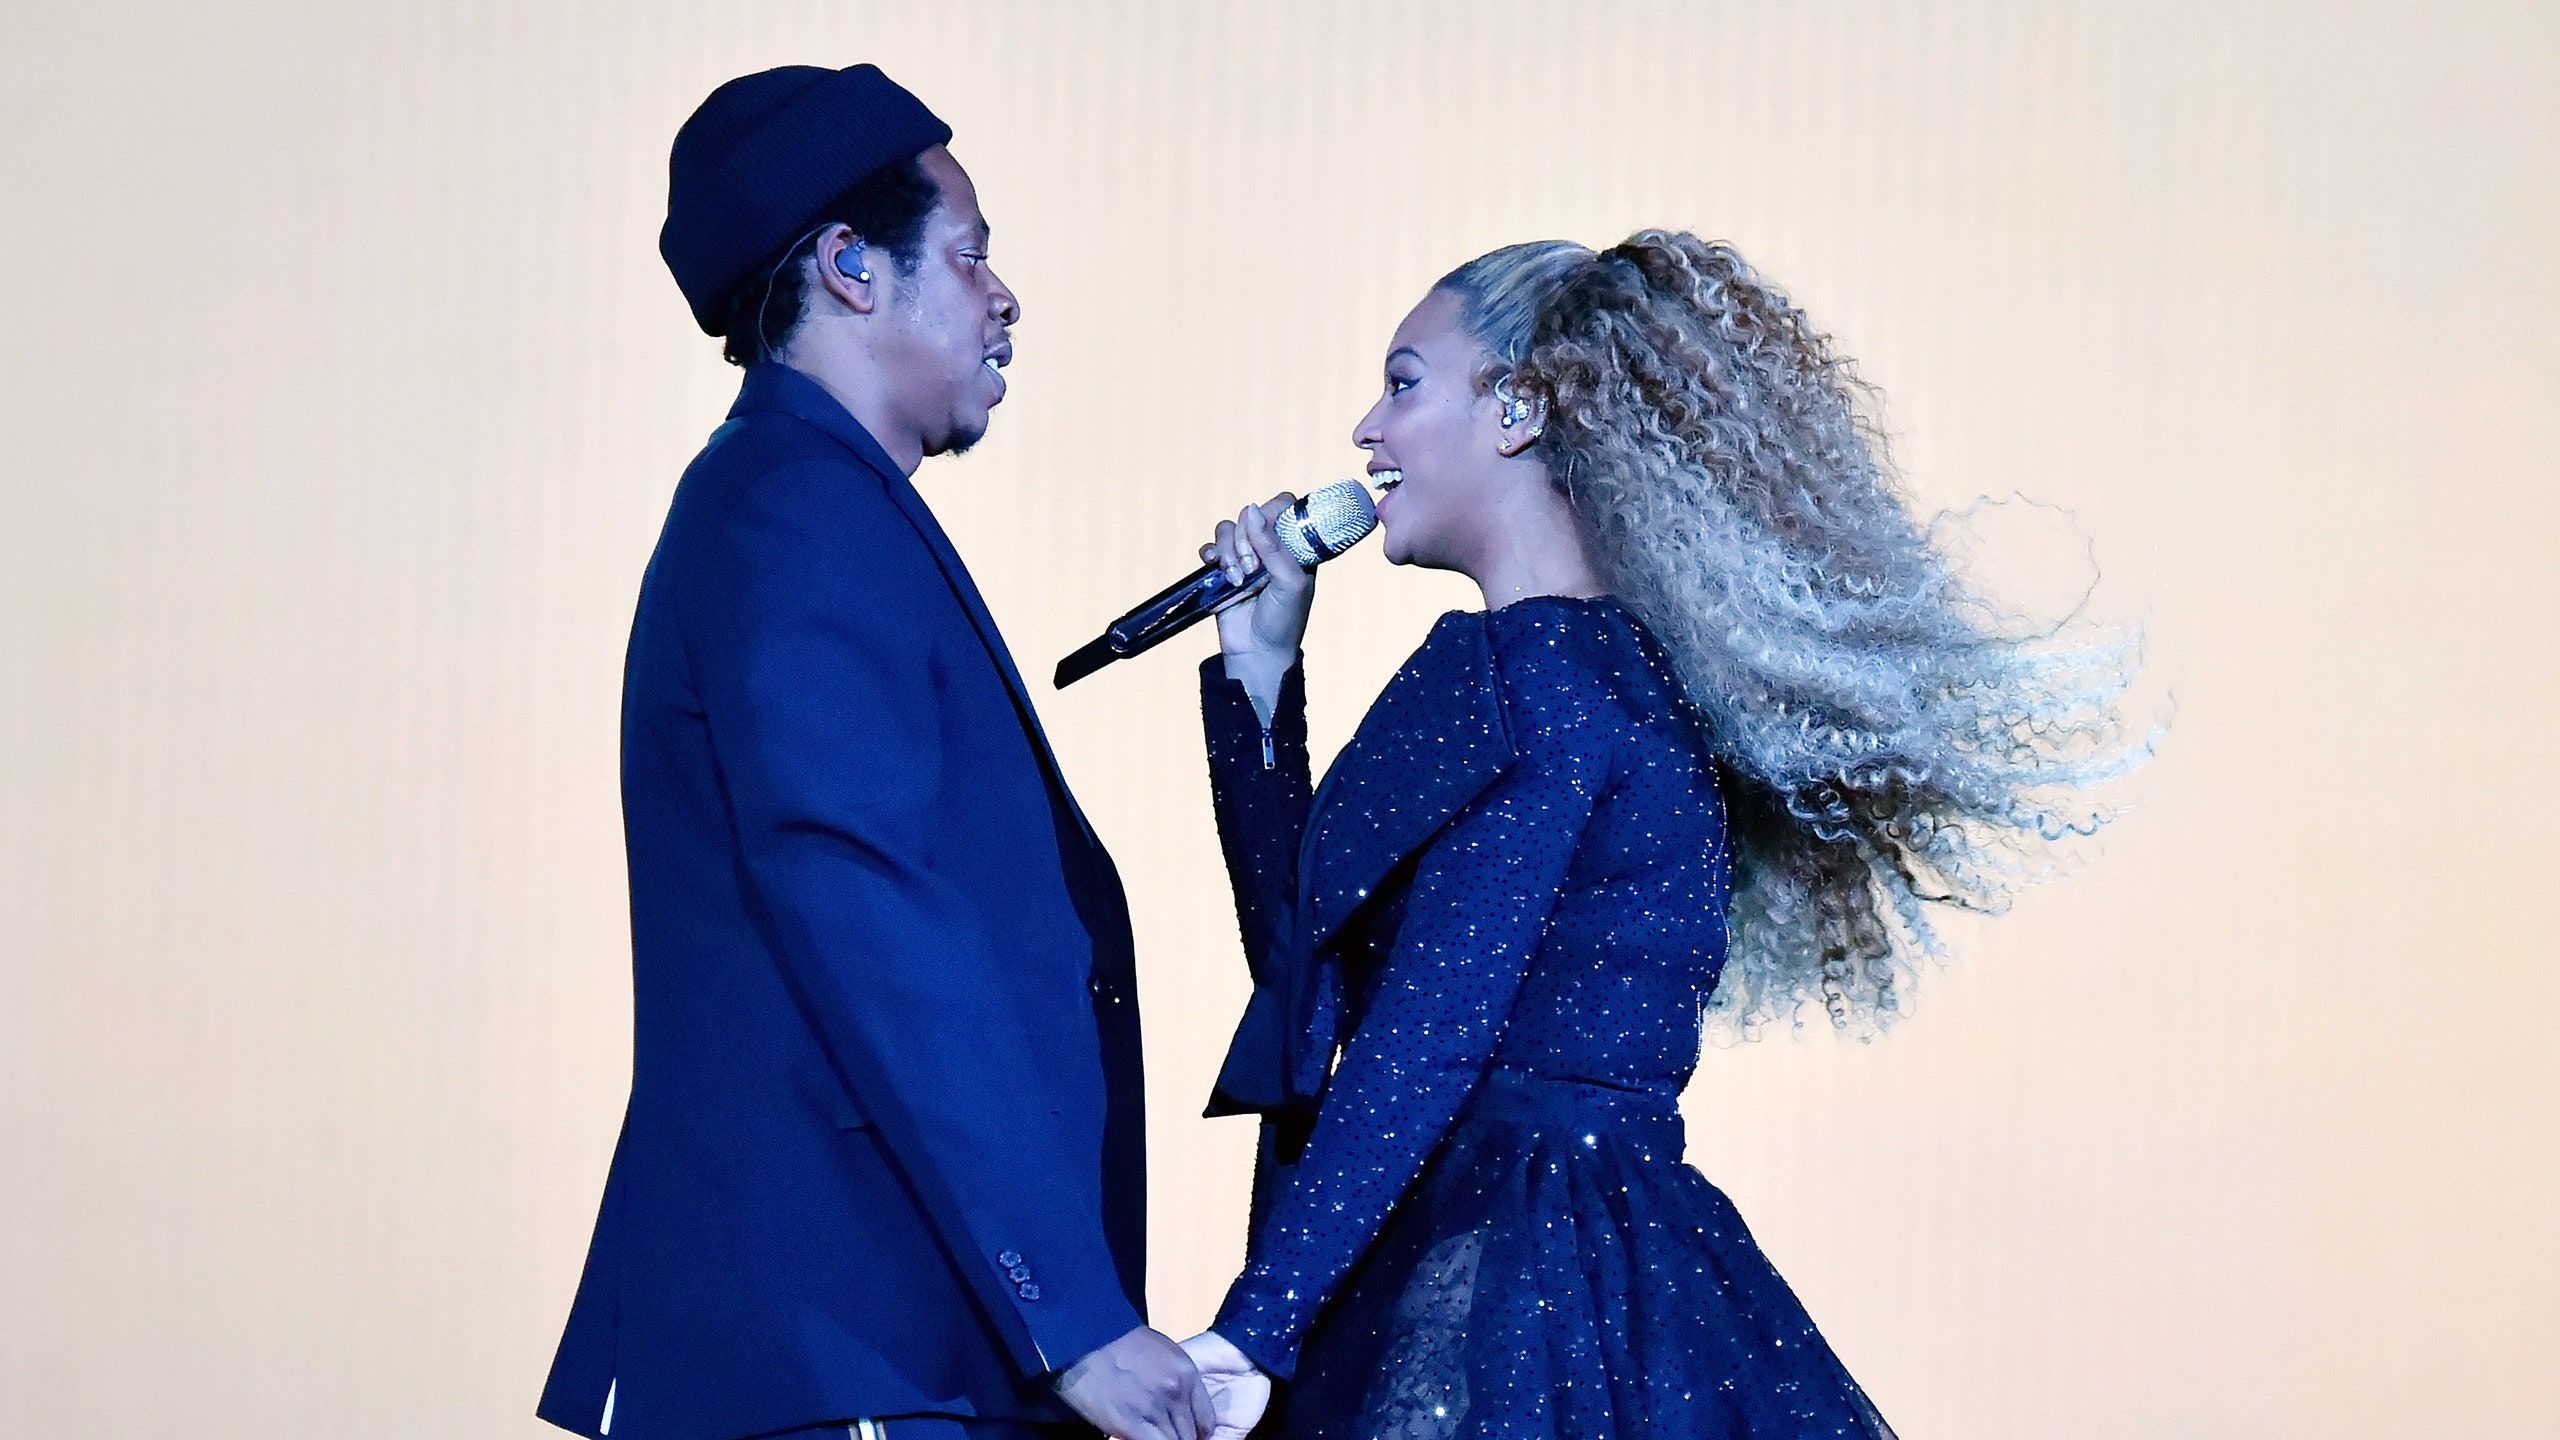 The Subtle Symbolism Behind The Artwork In Beyonce And Jay Z's Apesh*t Video